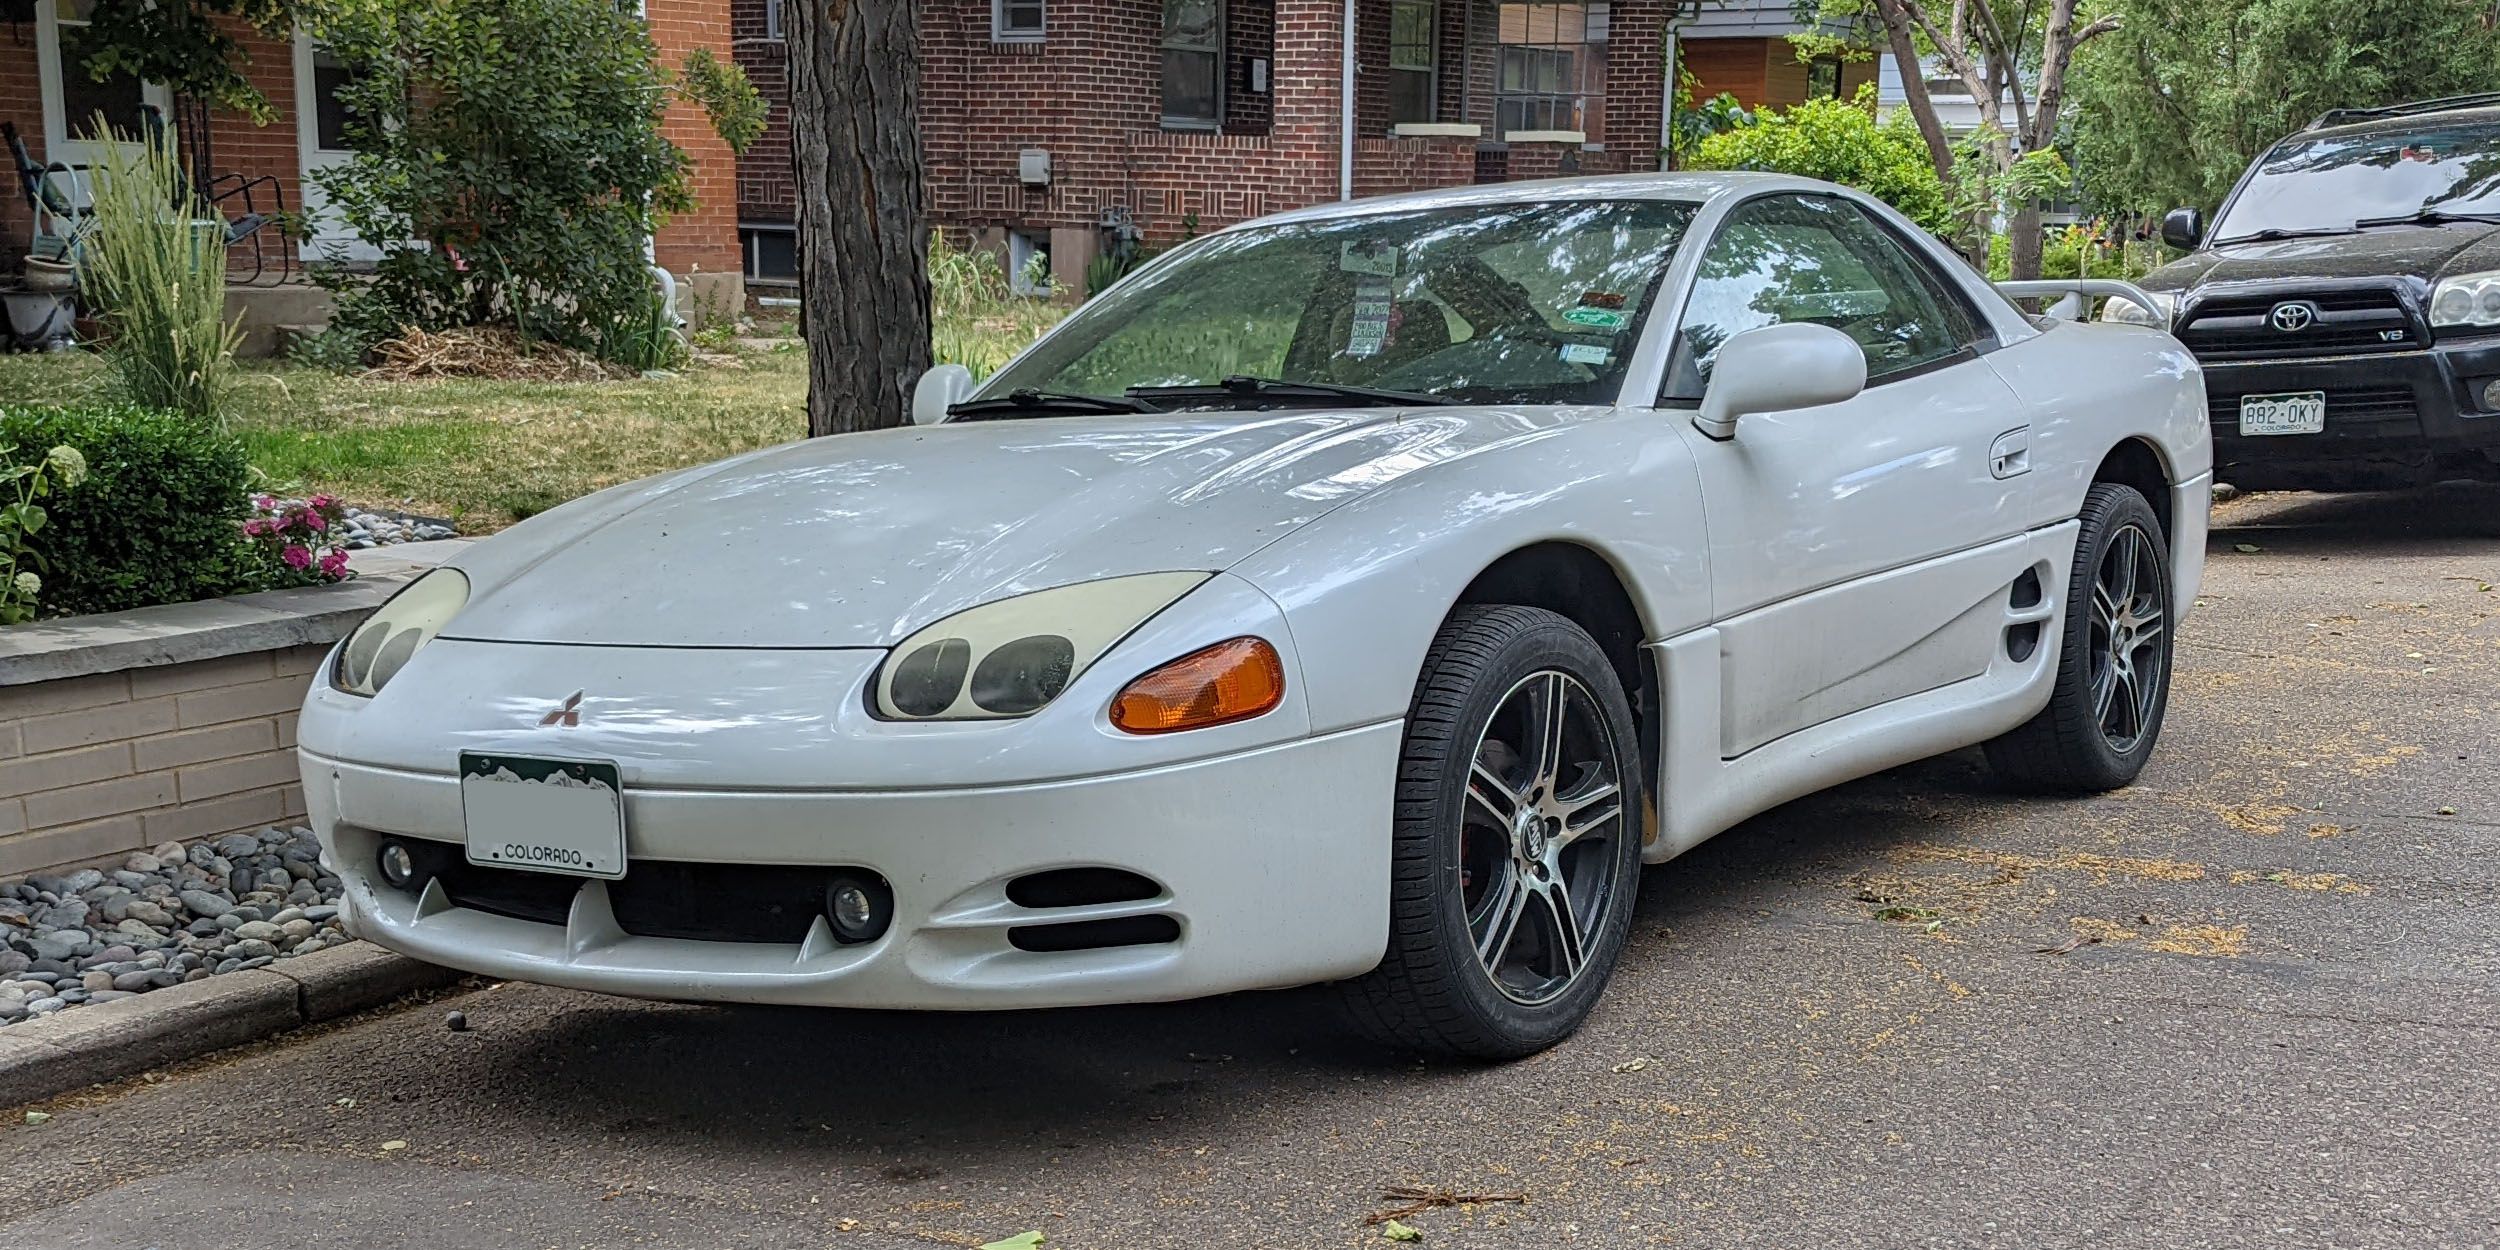 1996 Mitsubishi 3000GT Is Down on the Denver Street